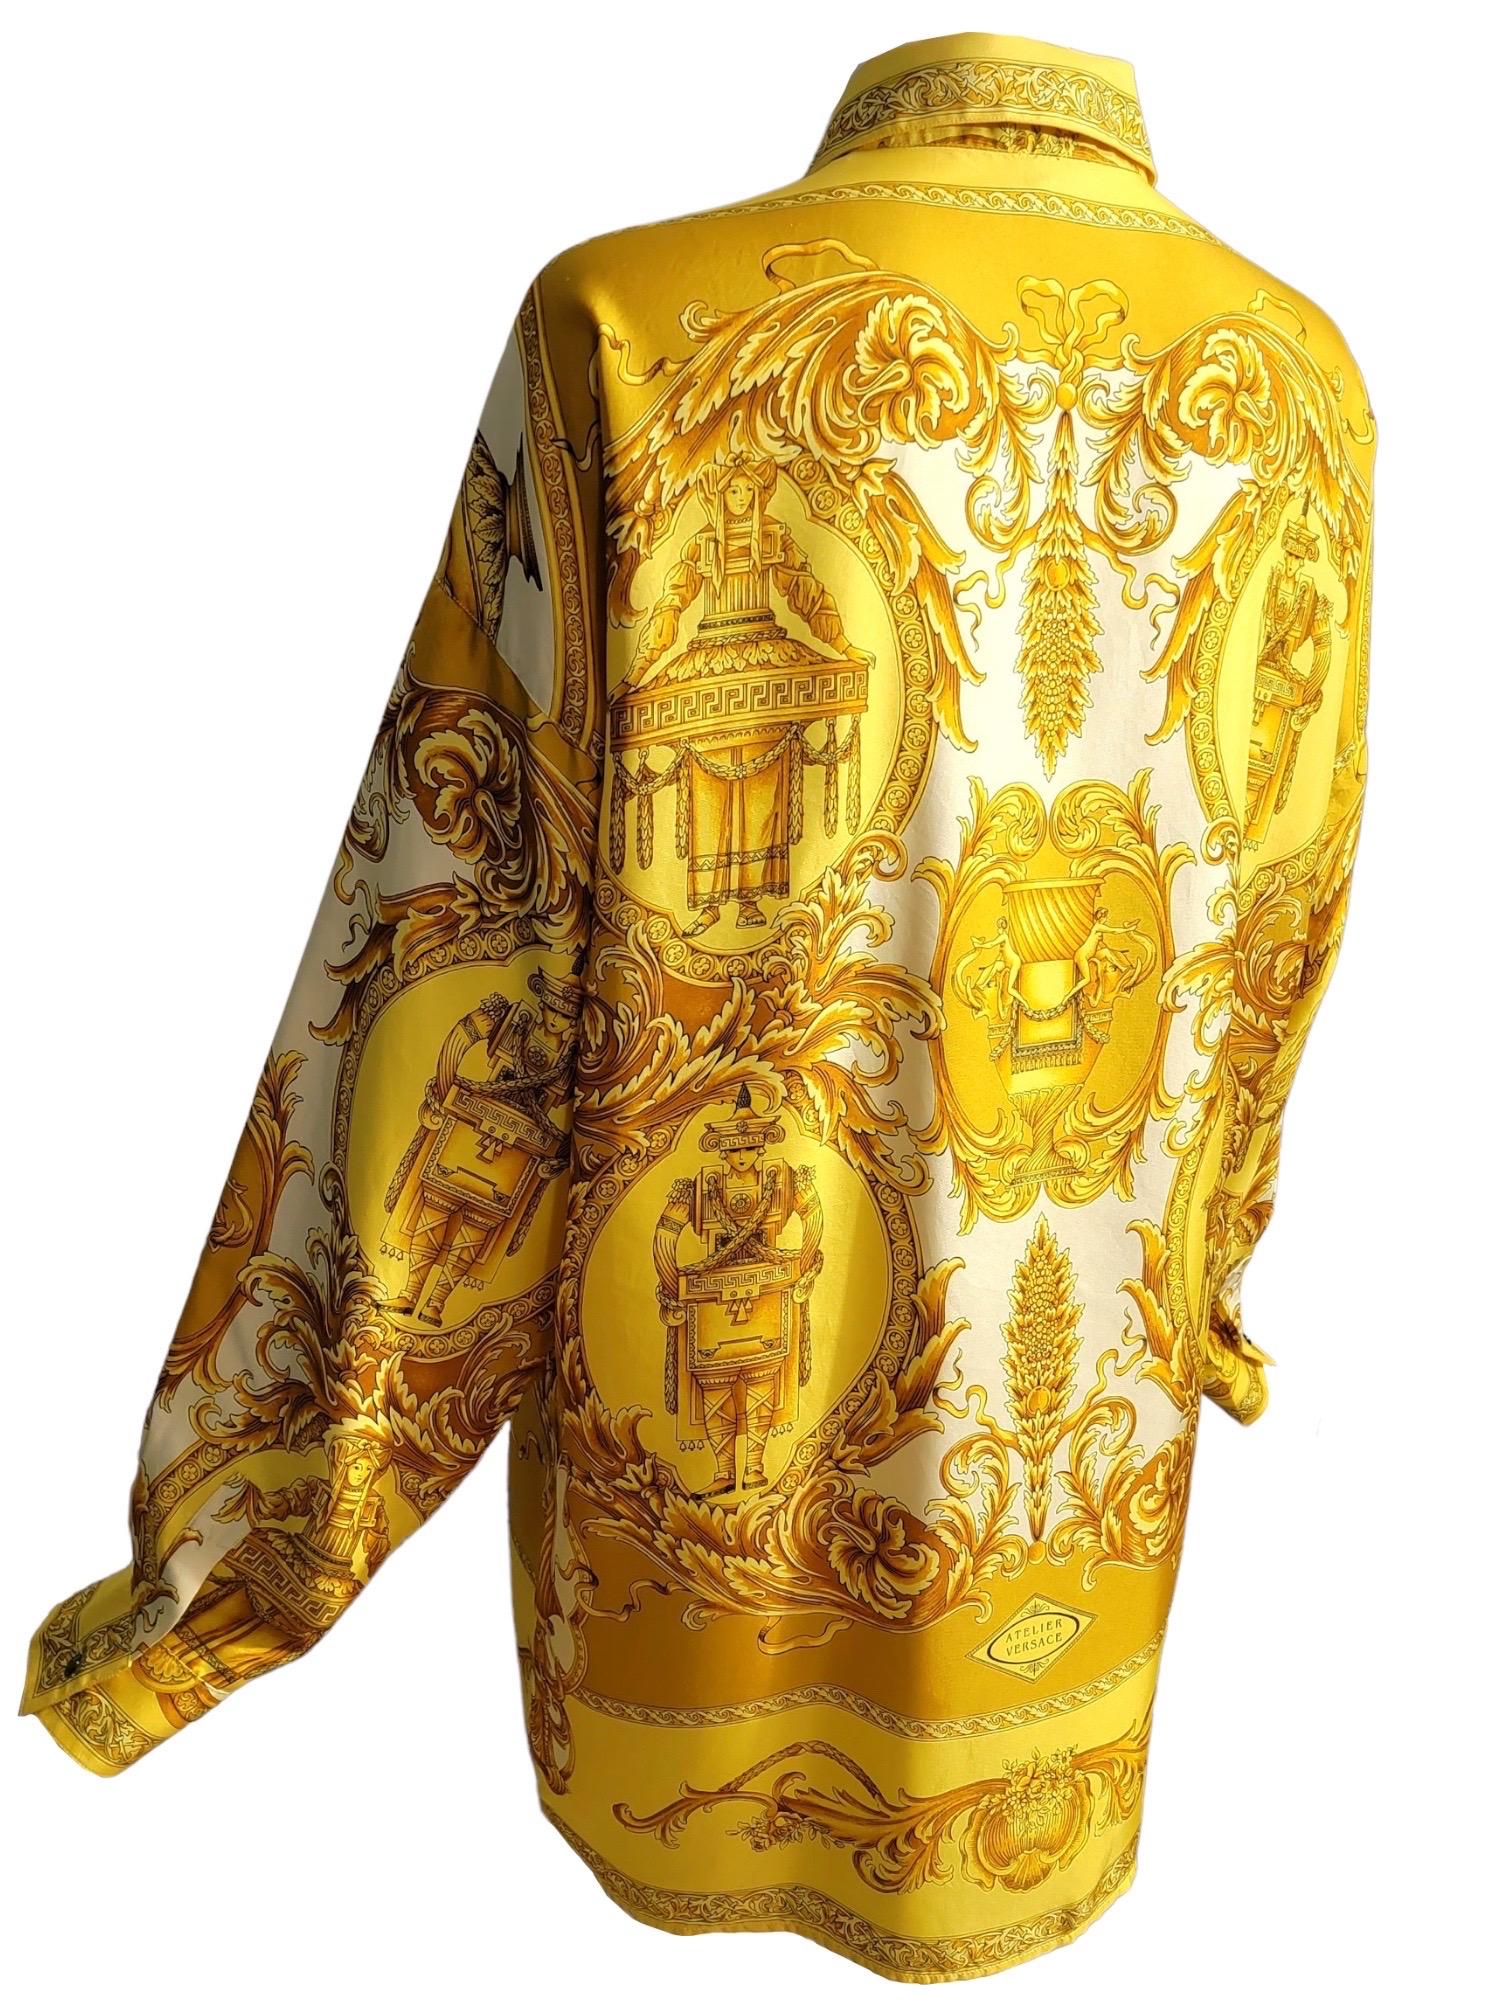 Gianni Versace Rococo Silk Shirt Men’s IT48 from 1995 For Sale 2